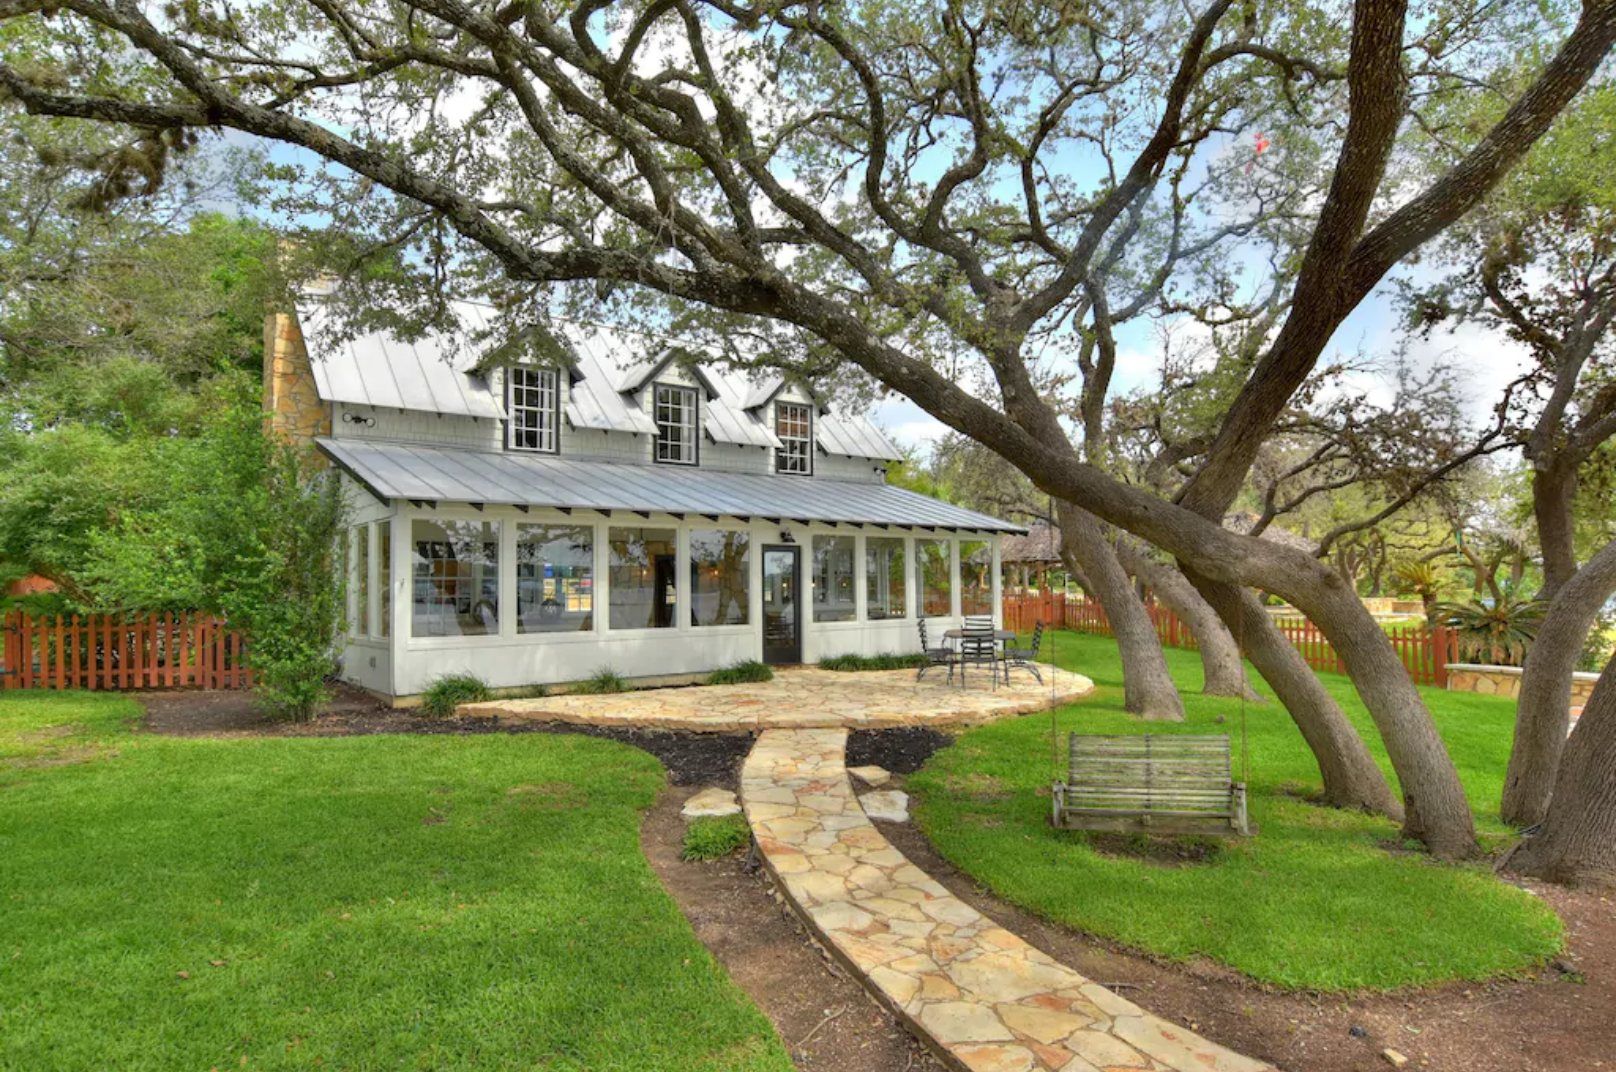 The Best Airbnbs in Austin Texas